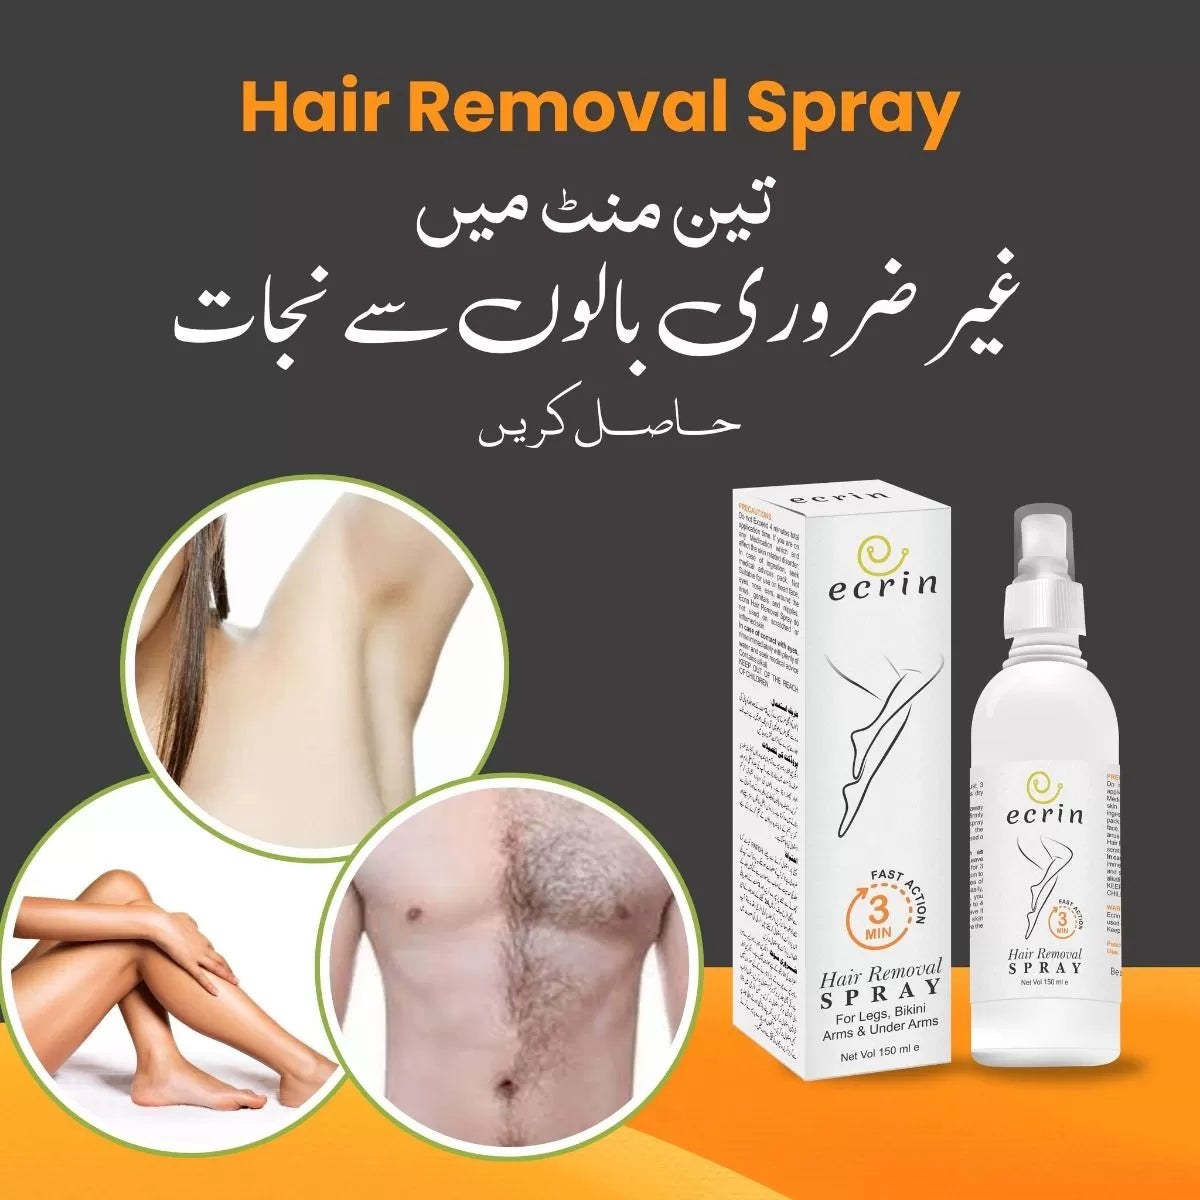 Hair Removal Spray (Fast Action In 3 Min.)